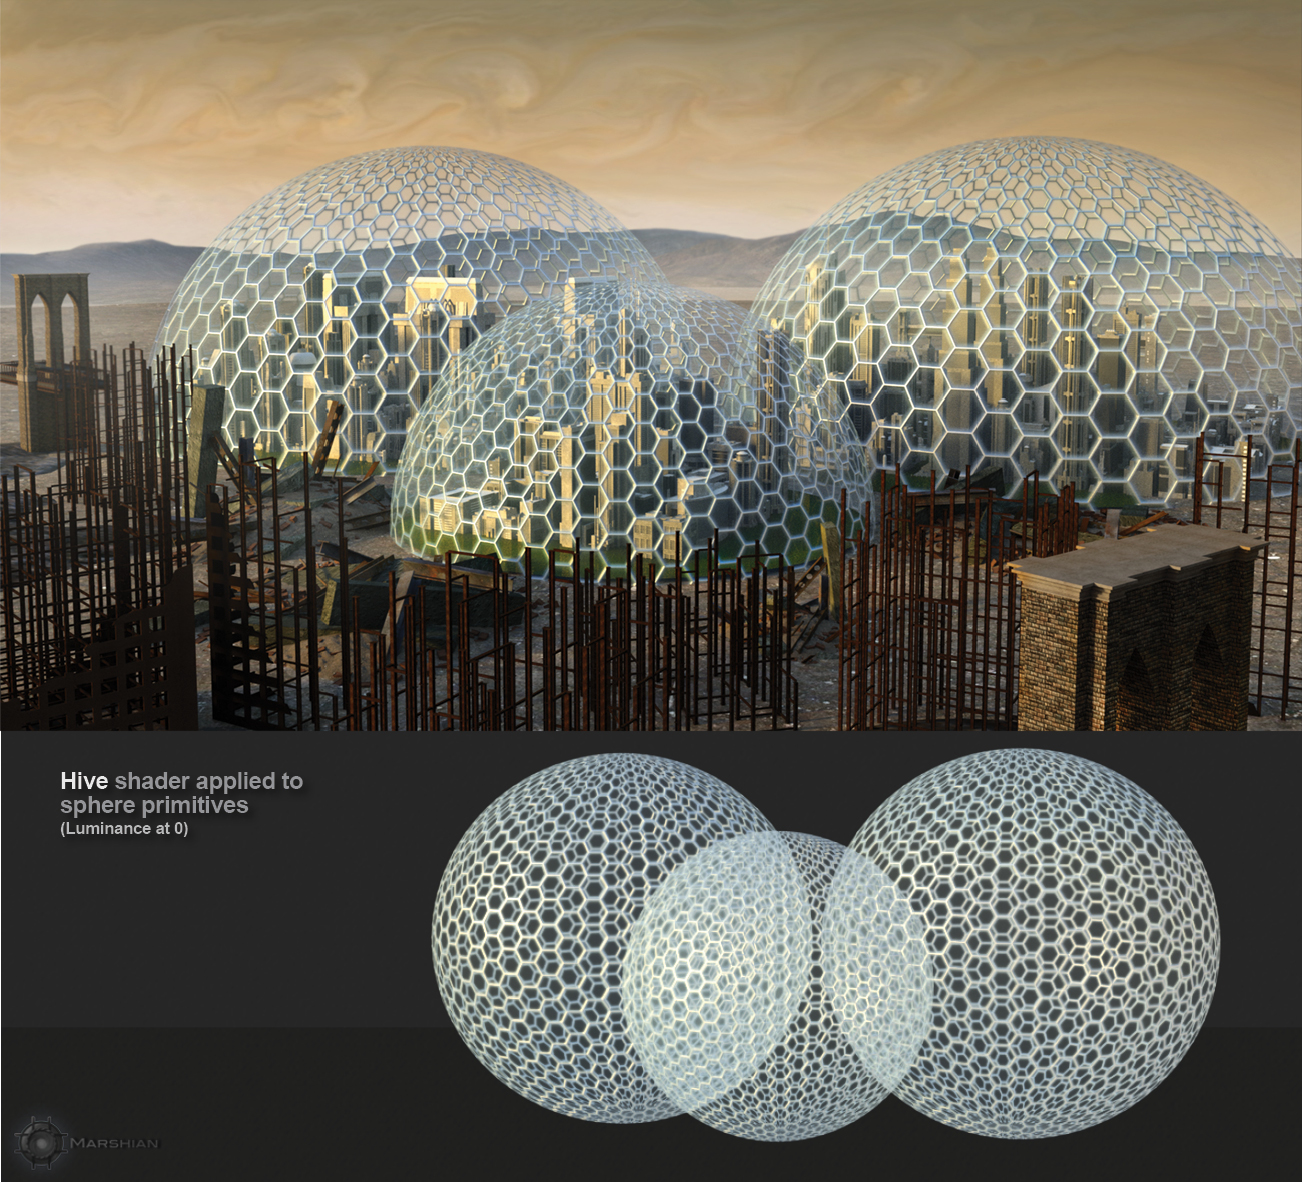 Wireframe and Hologram Shaders for Iray by: Marshian, 3D Models by Daz 3D